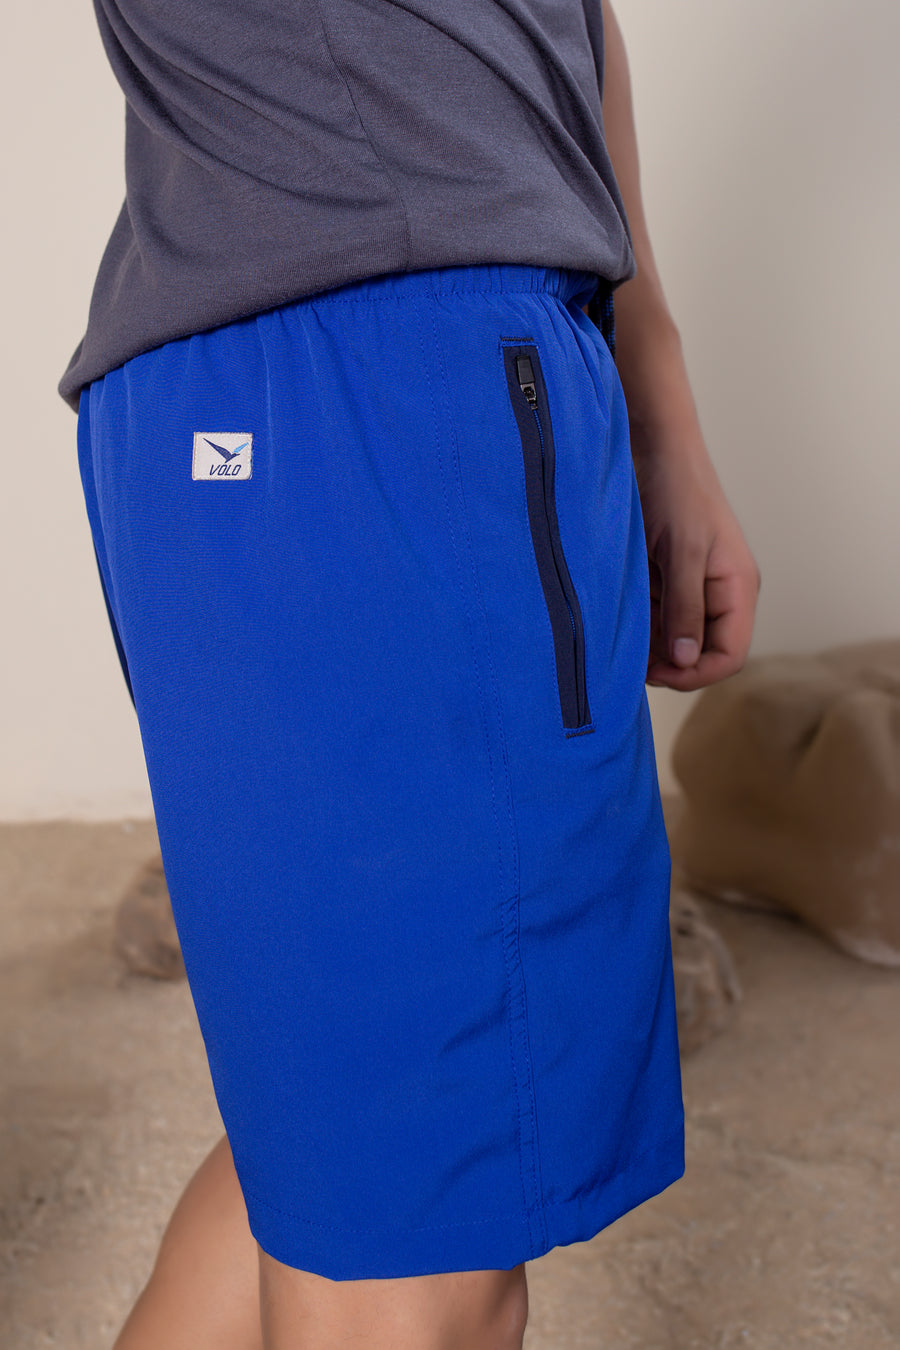 Men's Flight Shorts in Lapis Blue | VOLO Apparel | Designed so you can feel fly and completely secure, the Flight Shorts 2.0 are made with an ultralight micro stretch fabric that is quick drying and comes with a three zipper pocket design. The smart pocket tech makes it so your stuff won’t bounce when you do. Reinforced stitching so it can handle everything you will throw at it. The one short for your every adventure.